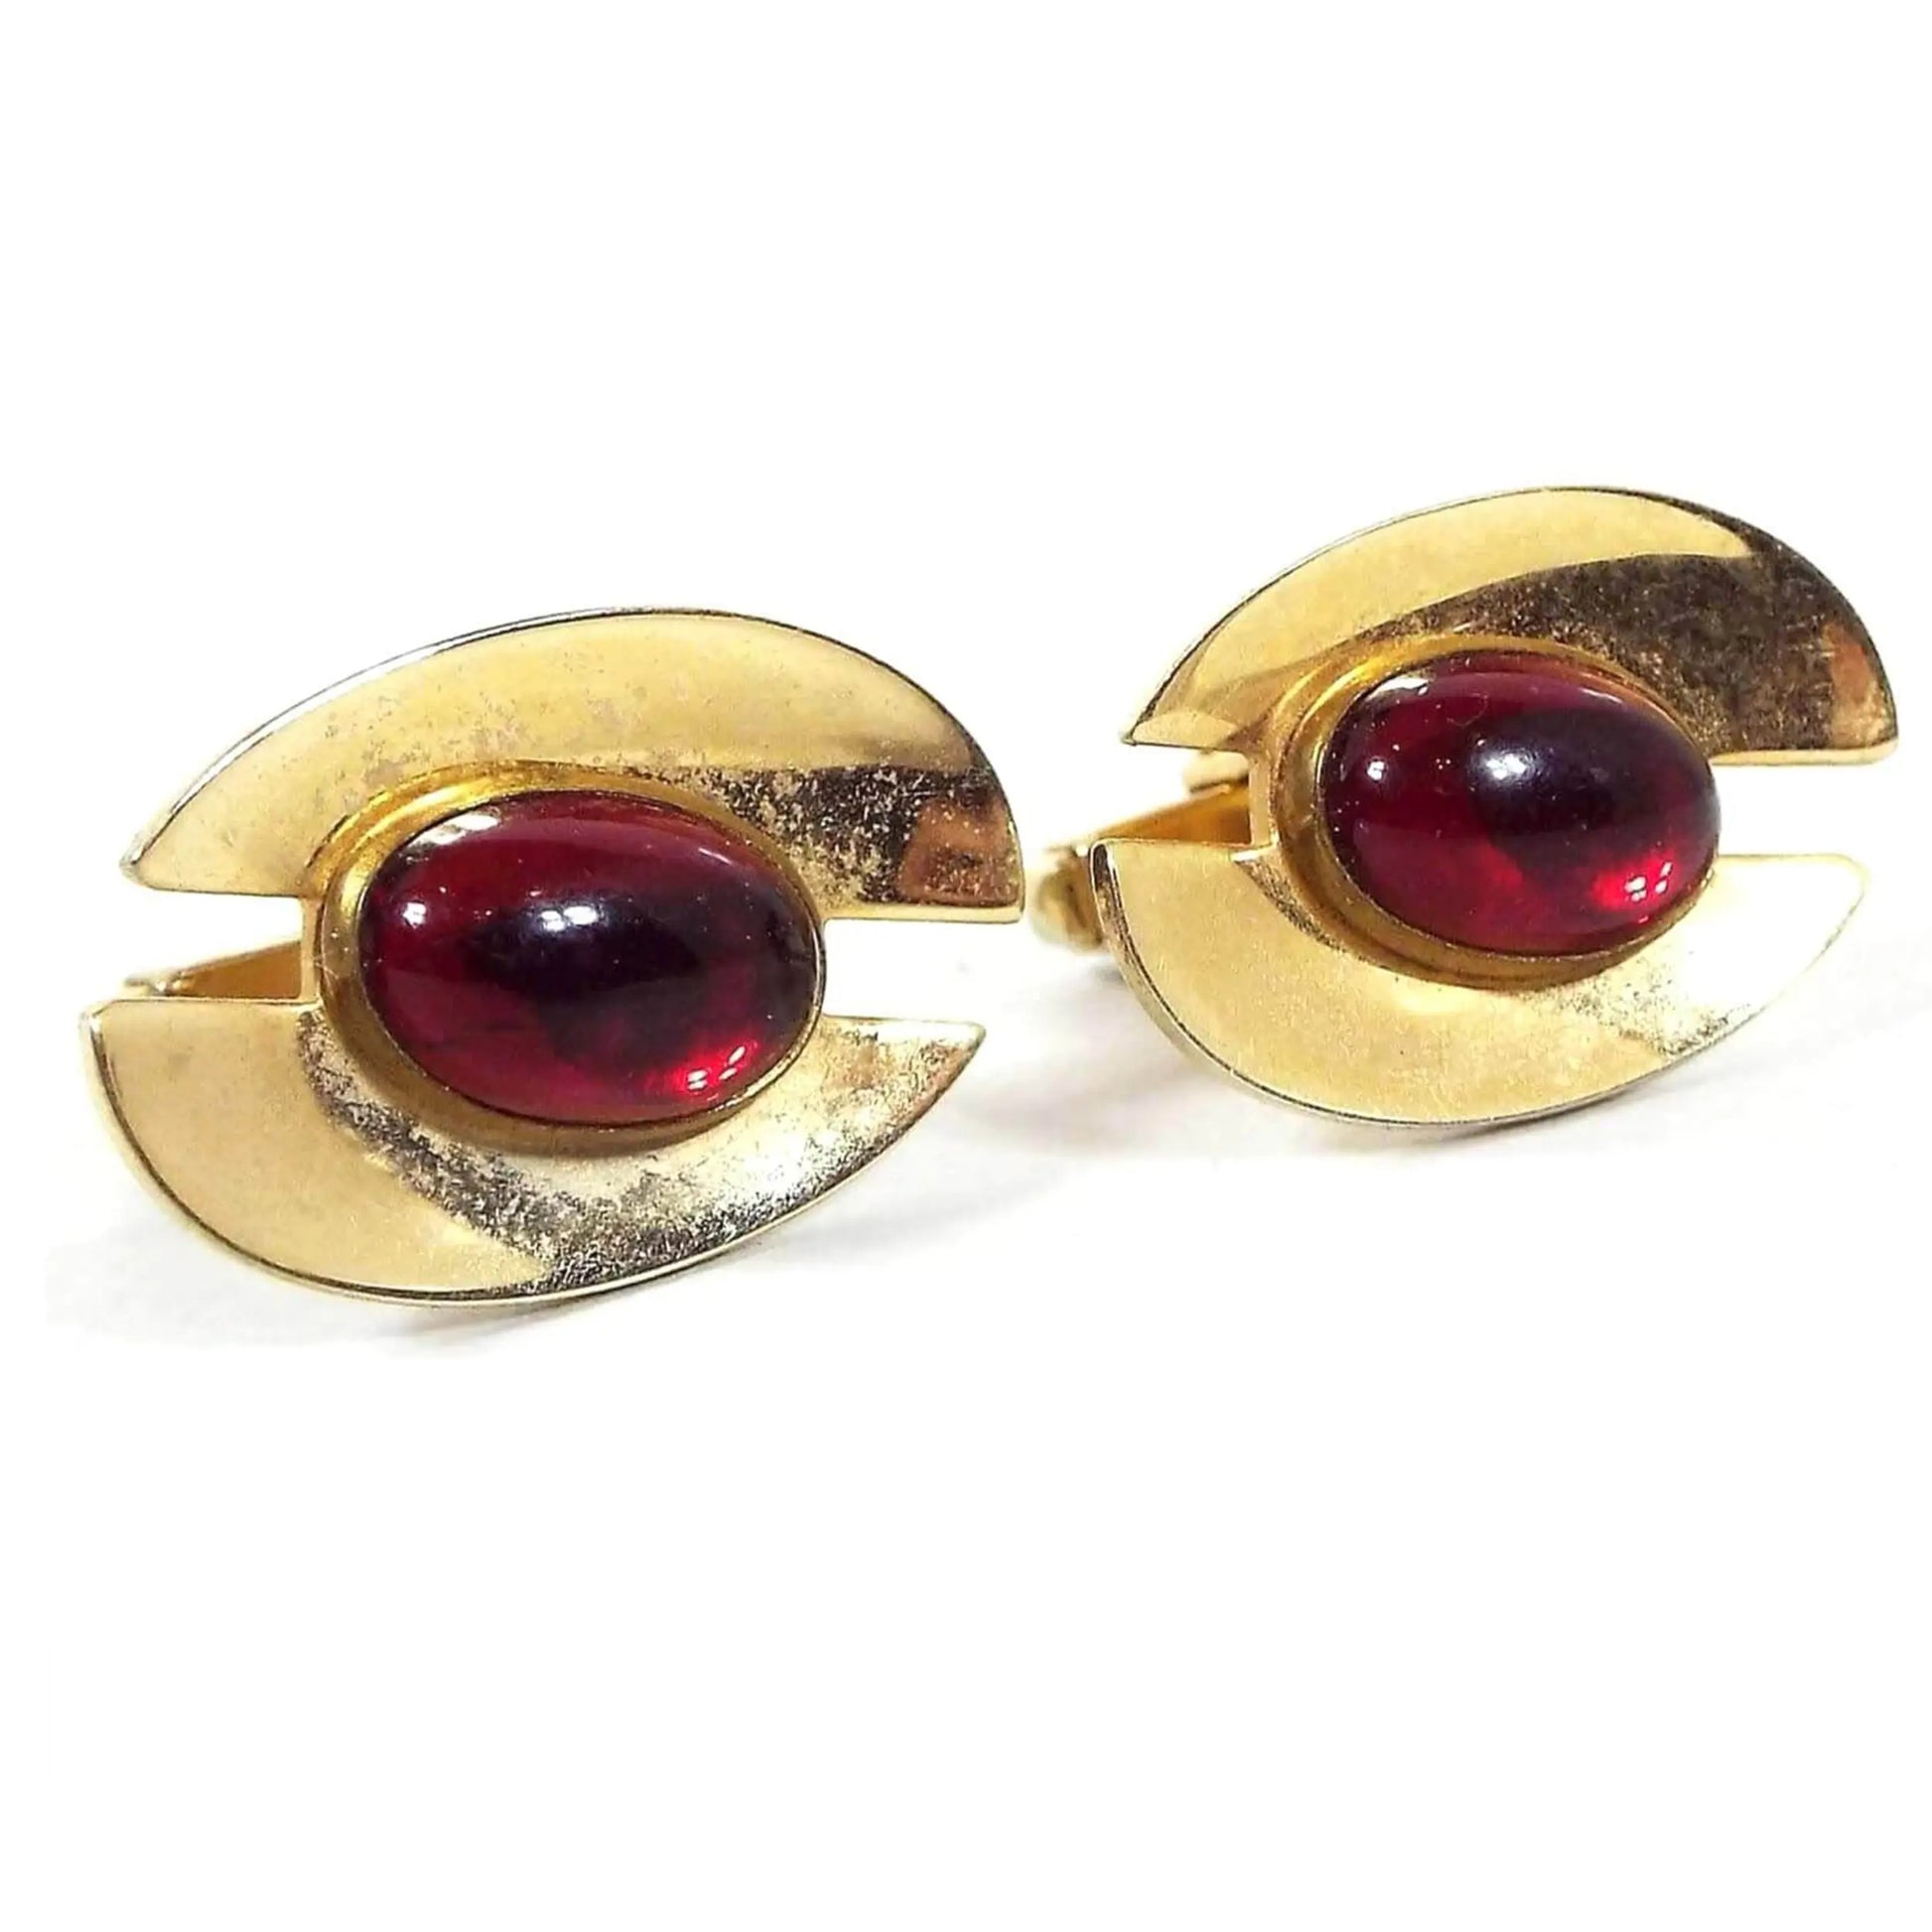 Front view of the Mid Century Anson vintage cufflinks. They are gold tone metal in color with a Modernist style split oval shape. In the middle are puffed oval lucite plastic cabs in a deep red color. There is some light spotting on the plating when seen under magnification.